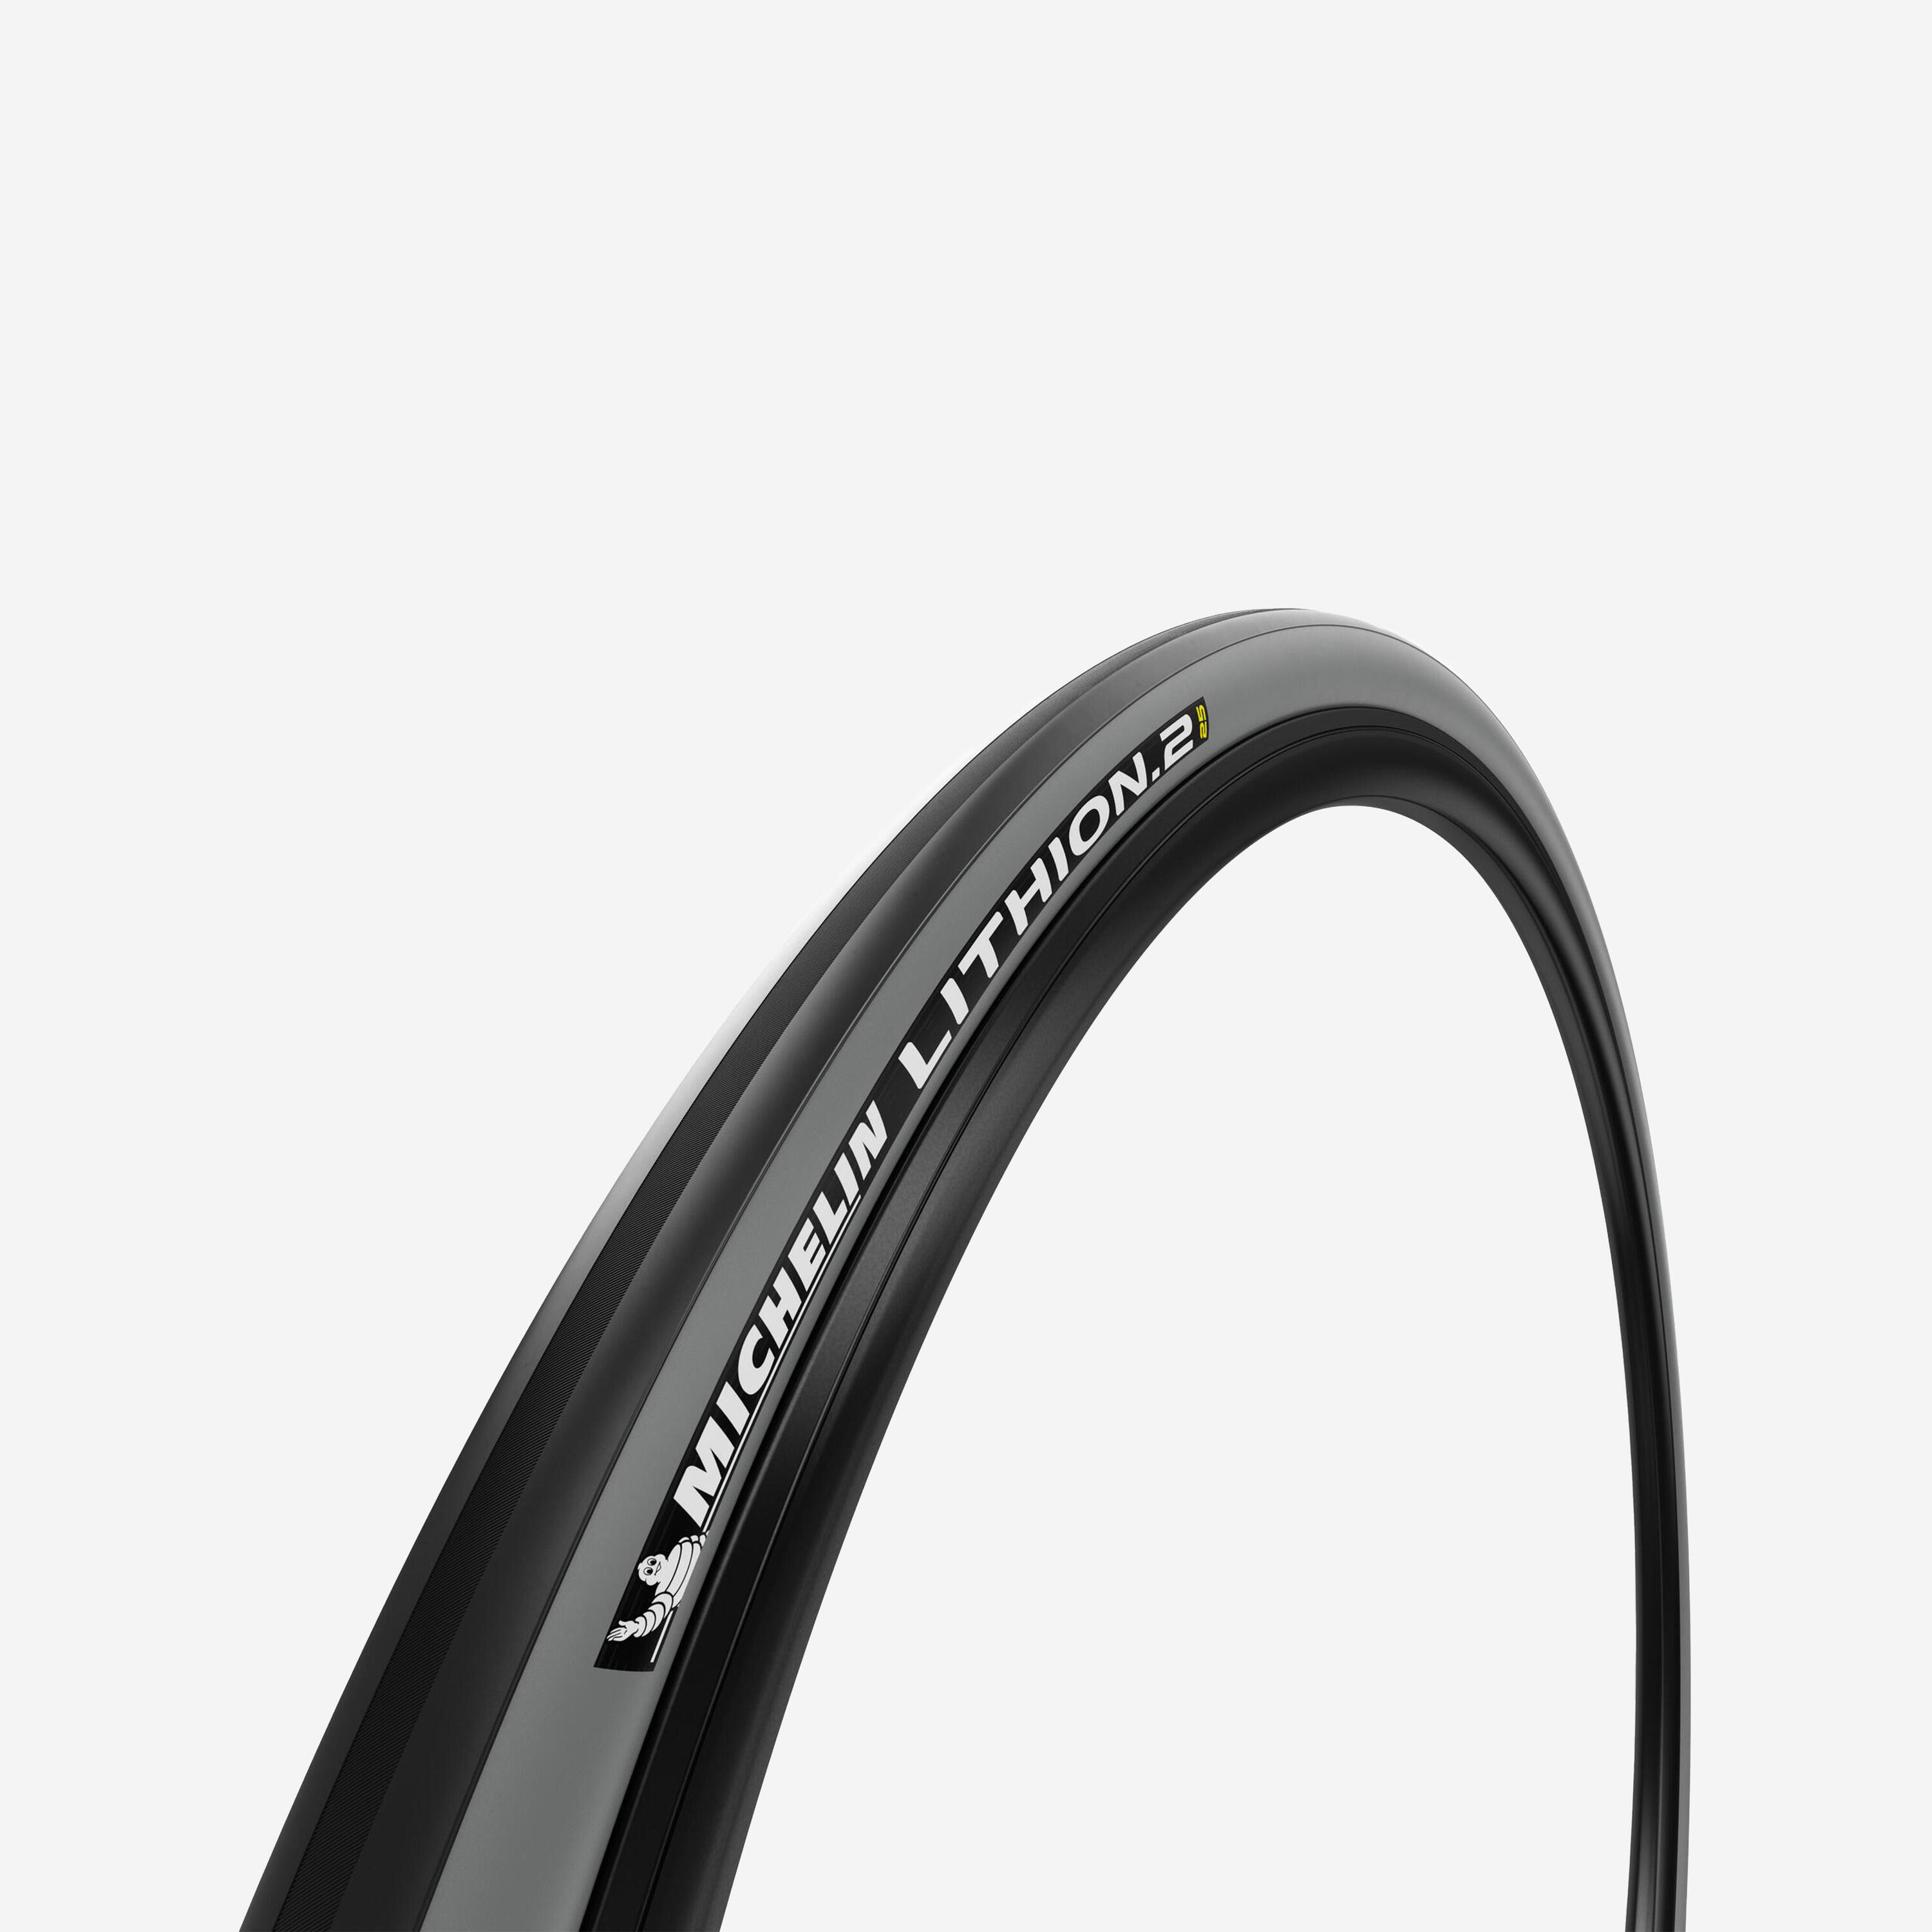 Lithion.2 Road Bike Tyre Twin Pack 700x23C 2/6